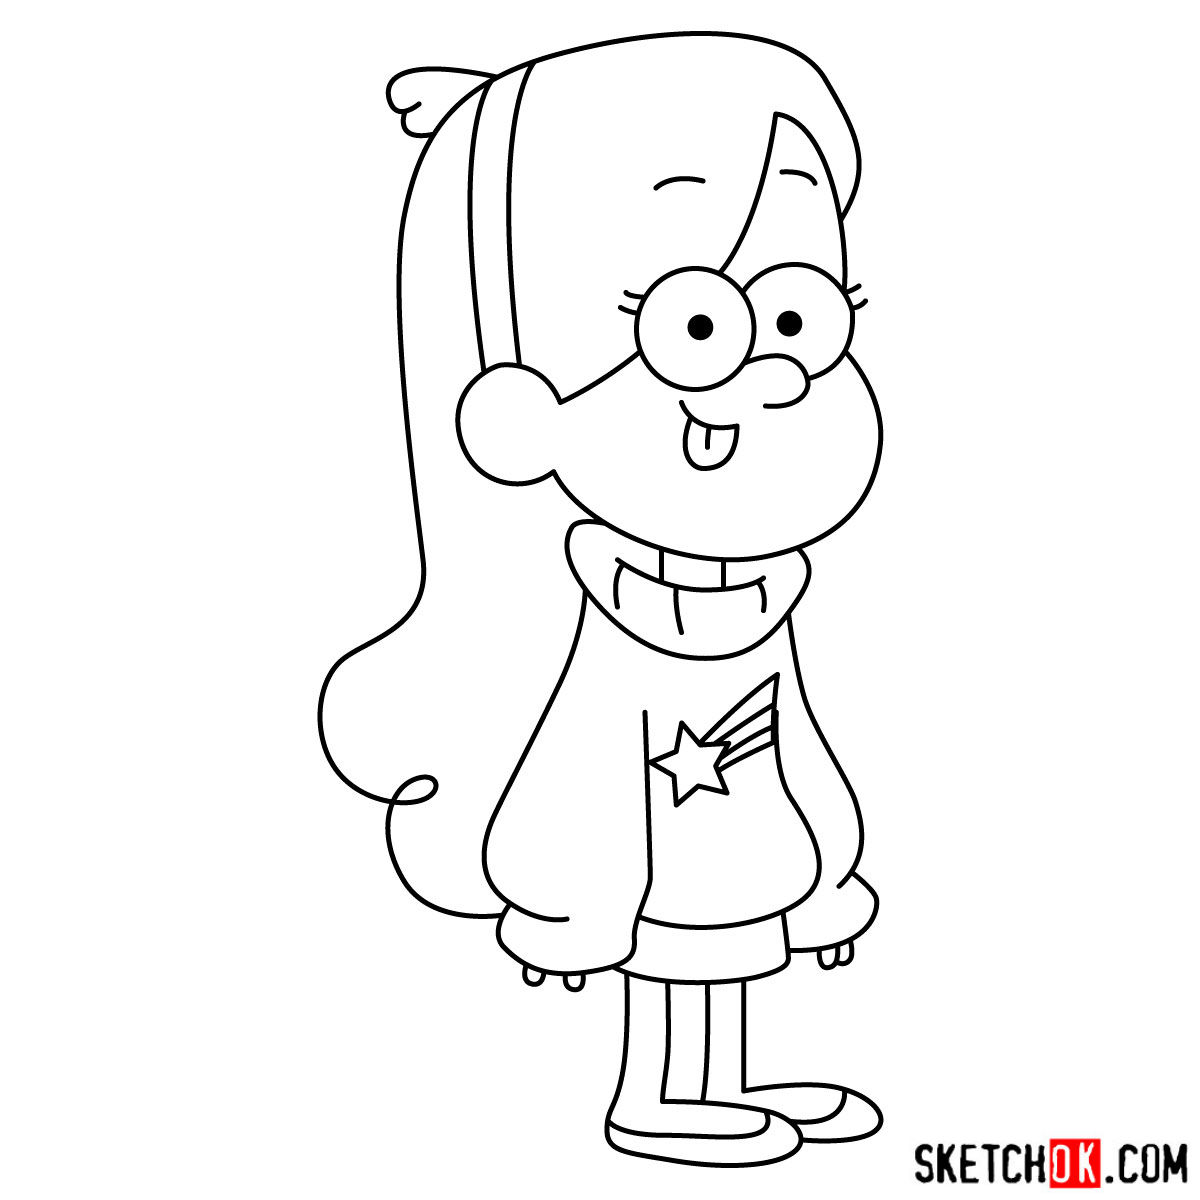 How to draw Mabel Pines - step 11